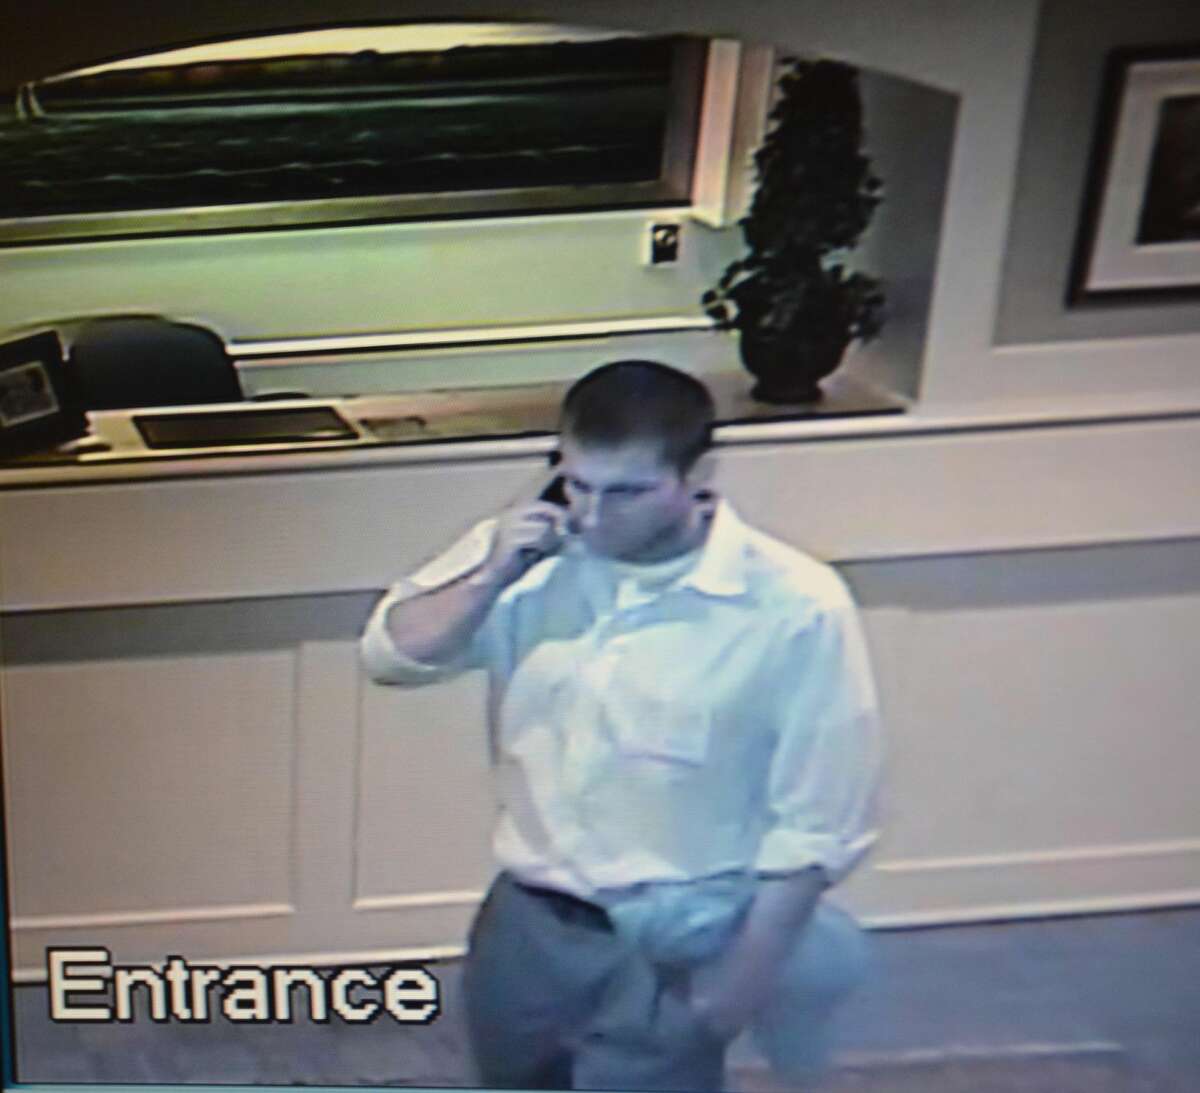 Suspect in thefts of wedding gifts in Westport on Saturday. 